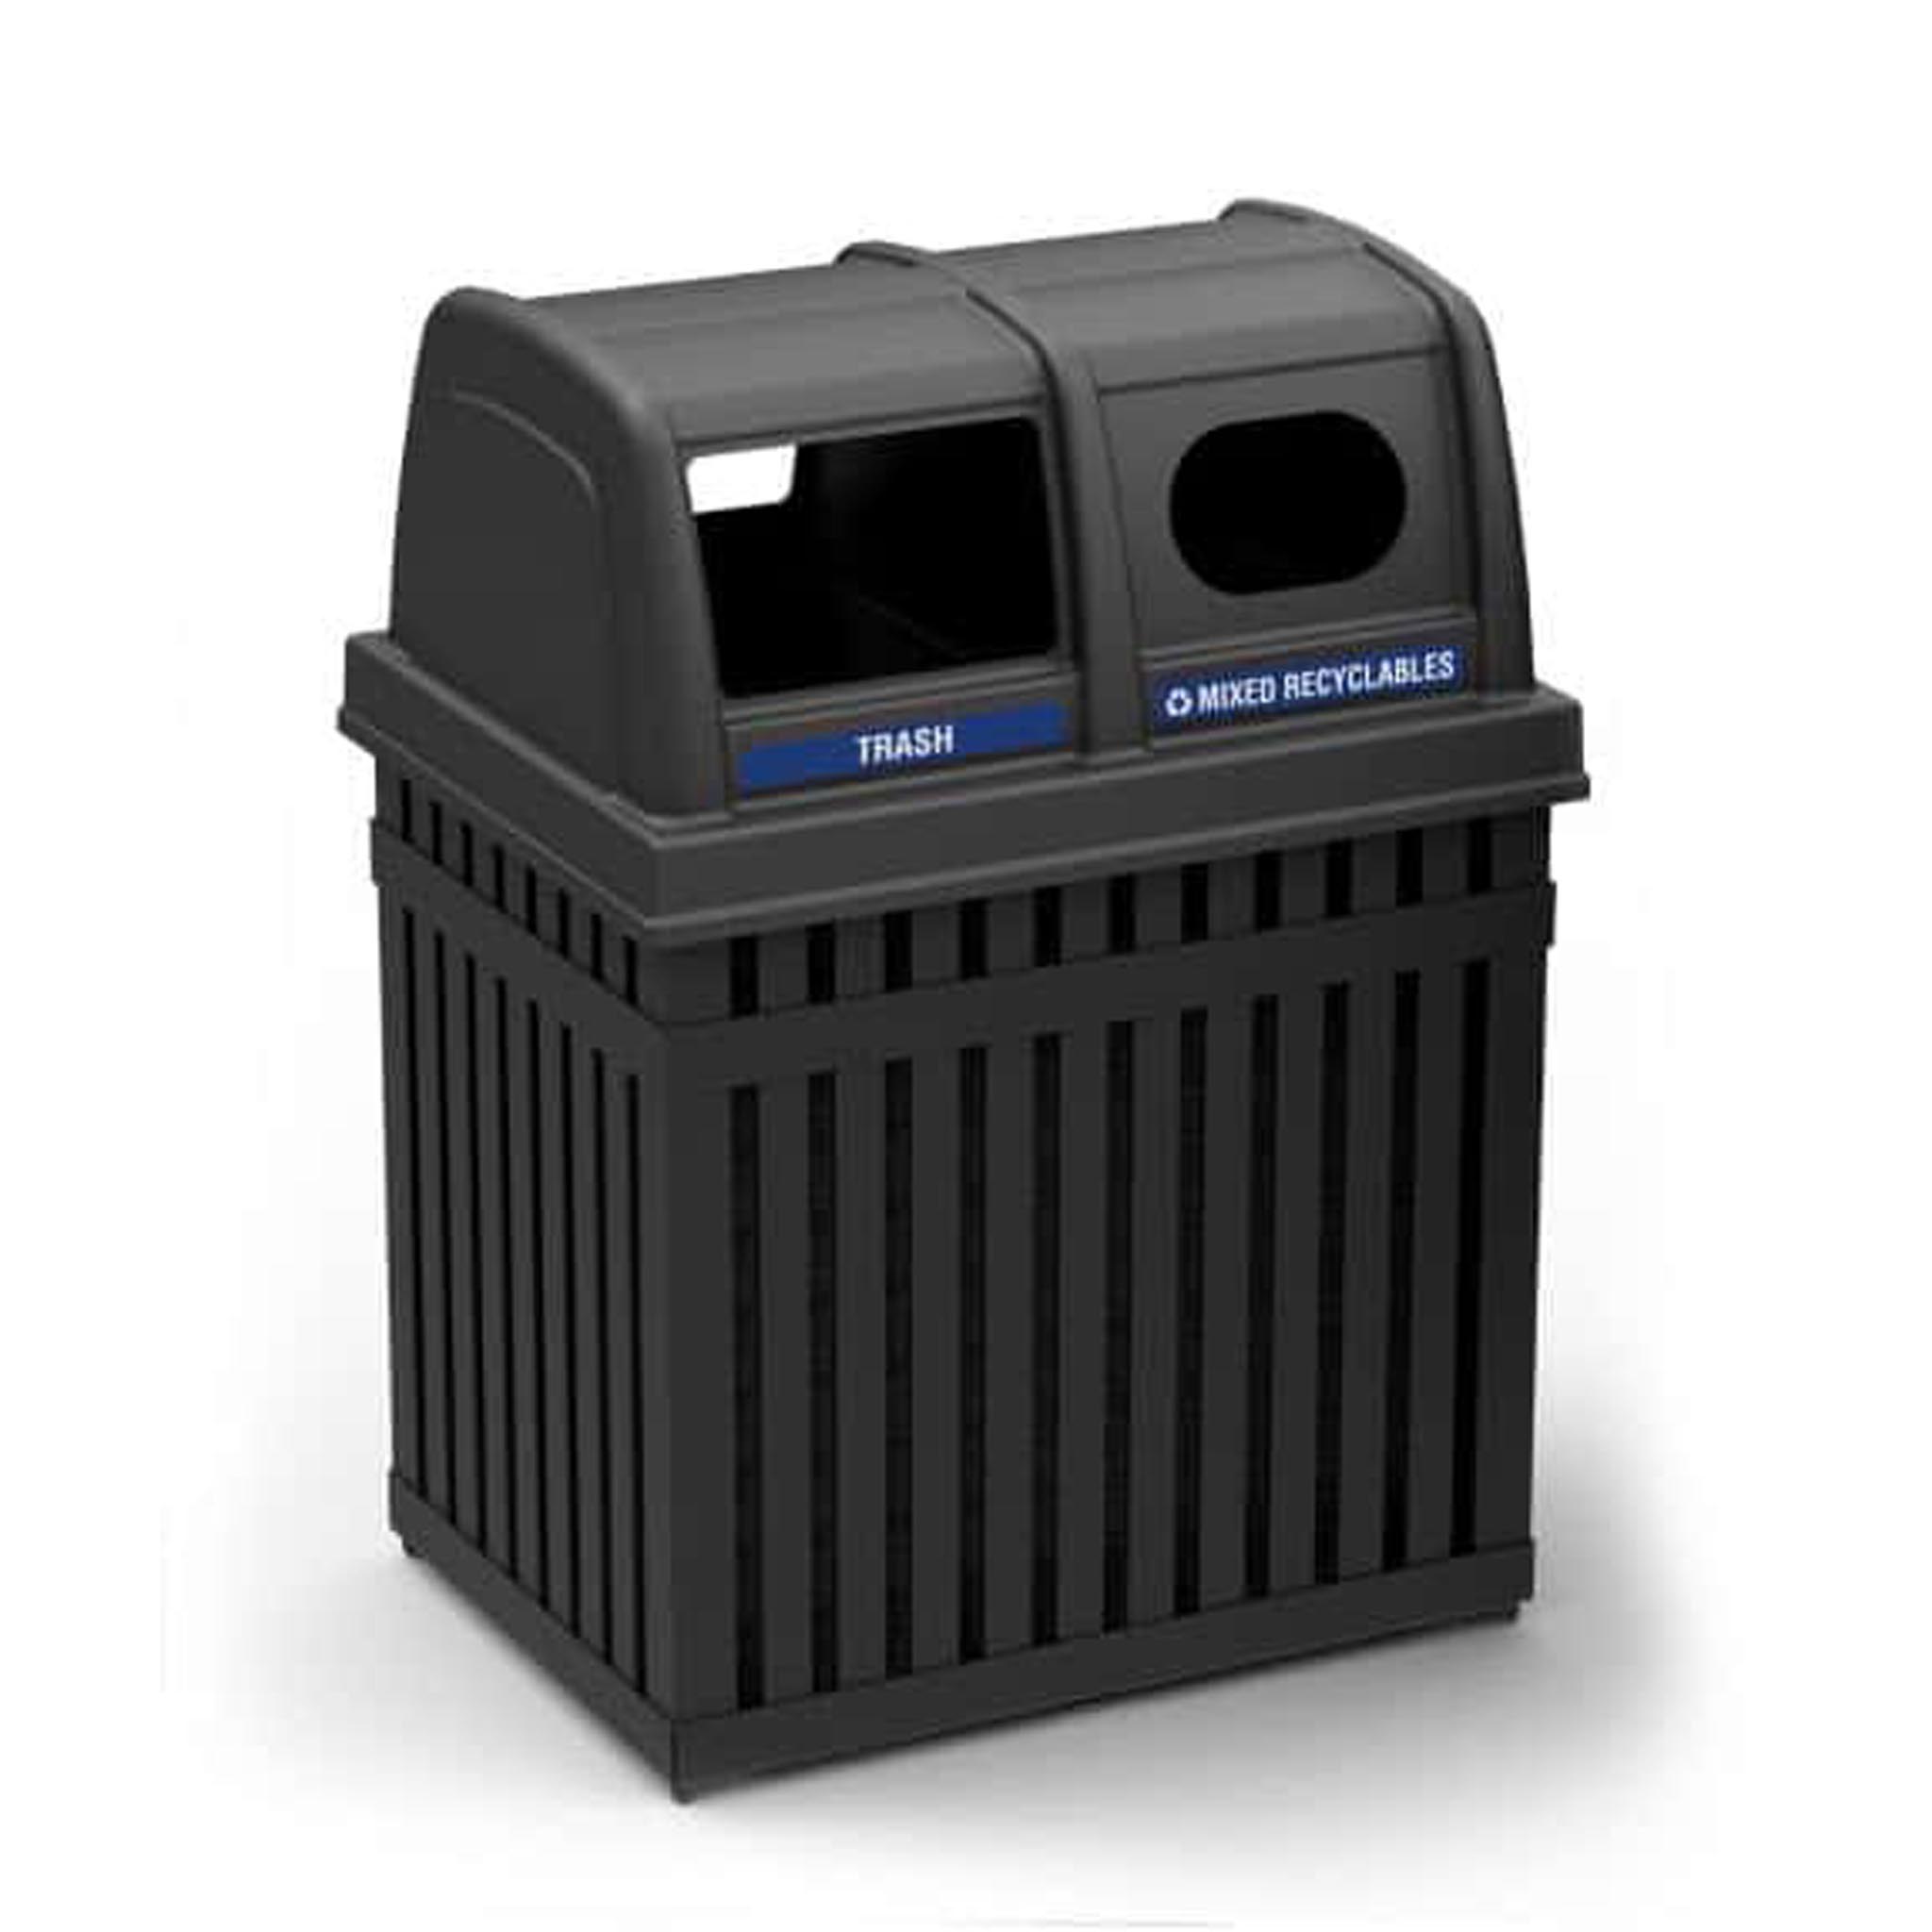 http://www.commercialzone.com/wp-content/uploads/2020/04/web-72720199-ArchTec-Series-Parkview-2-50-Gallon-Trash-and-Recycling-Container-Black-Trash-and-Mixed-Recyclables-Studio-Image.jpg